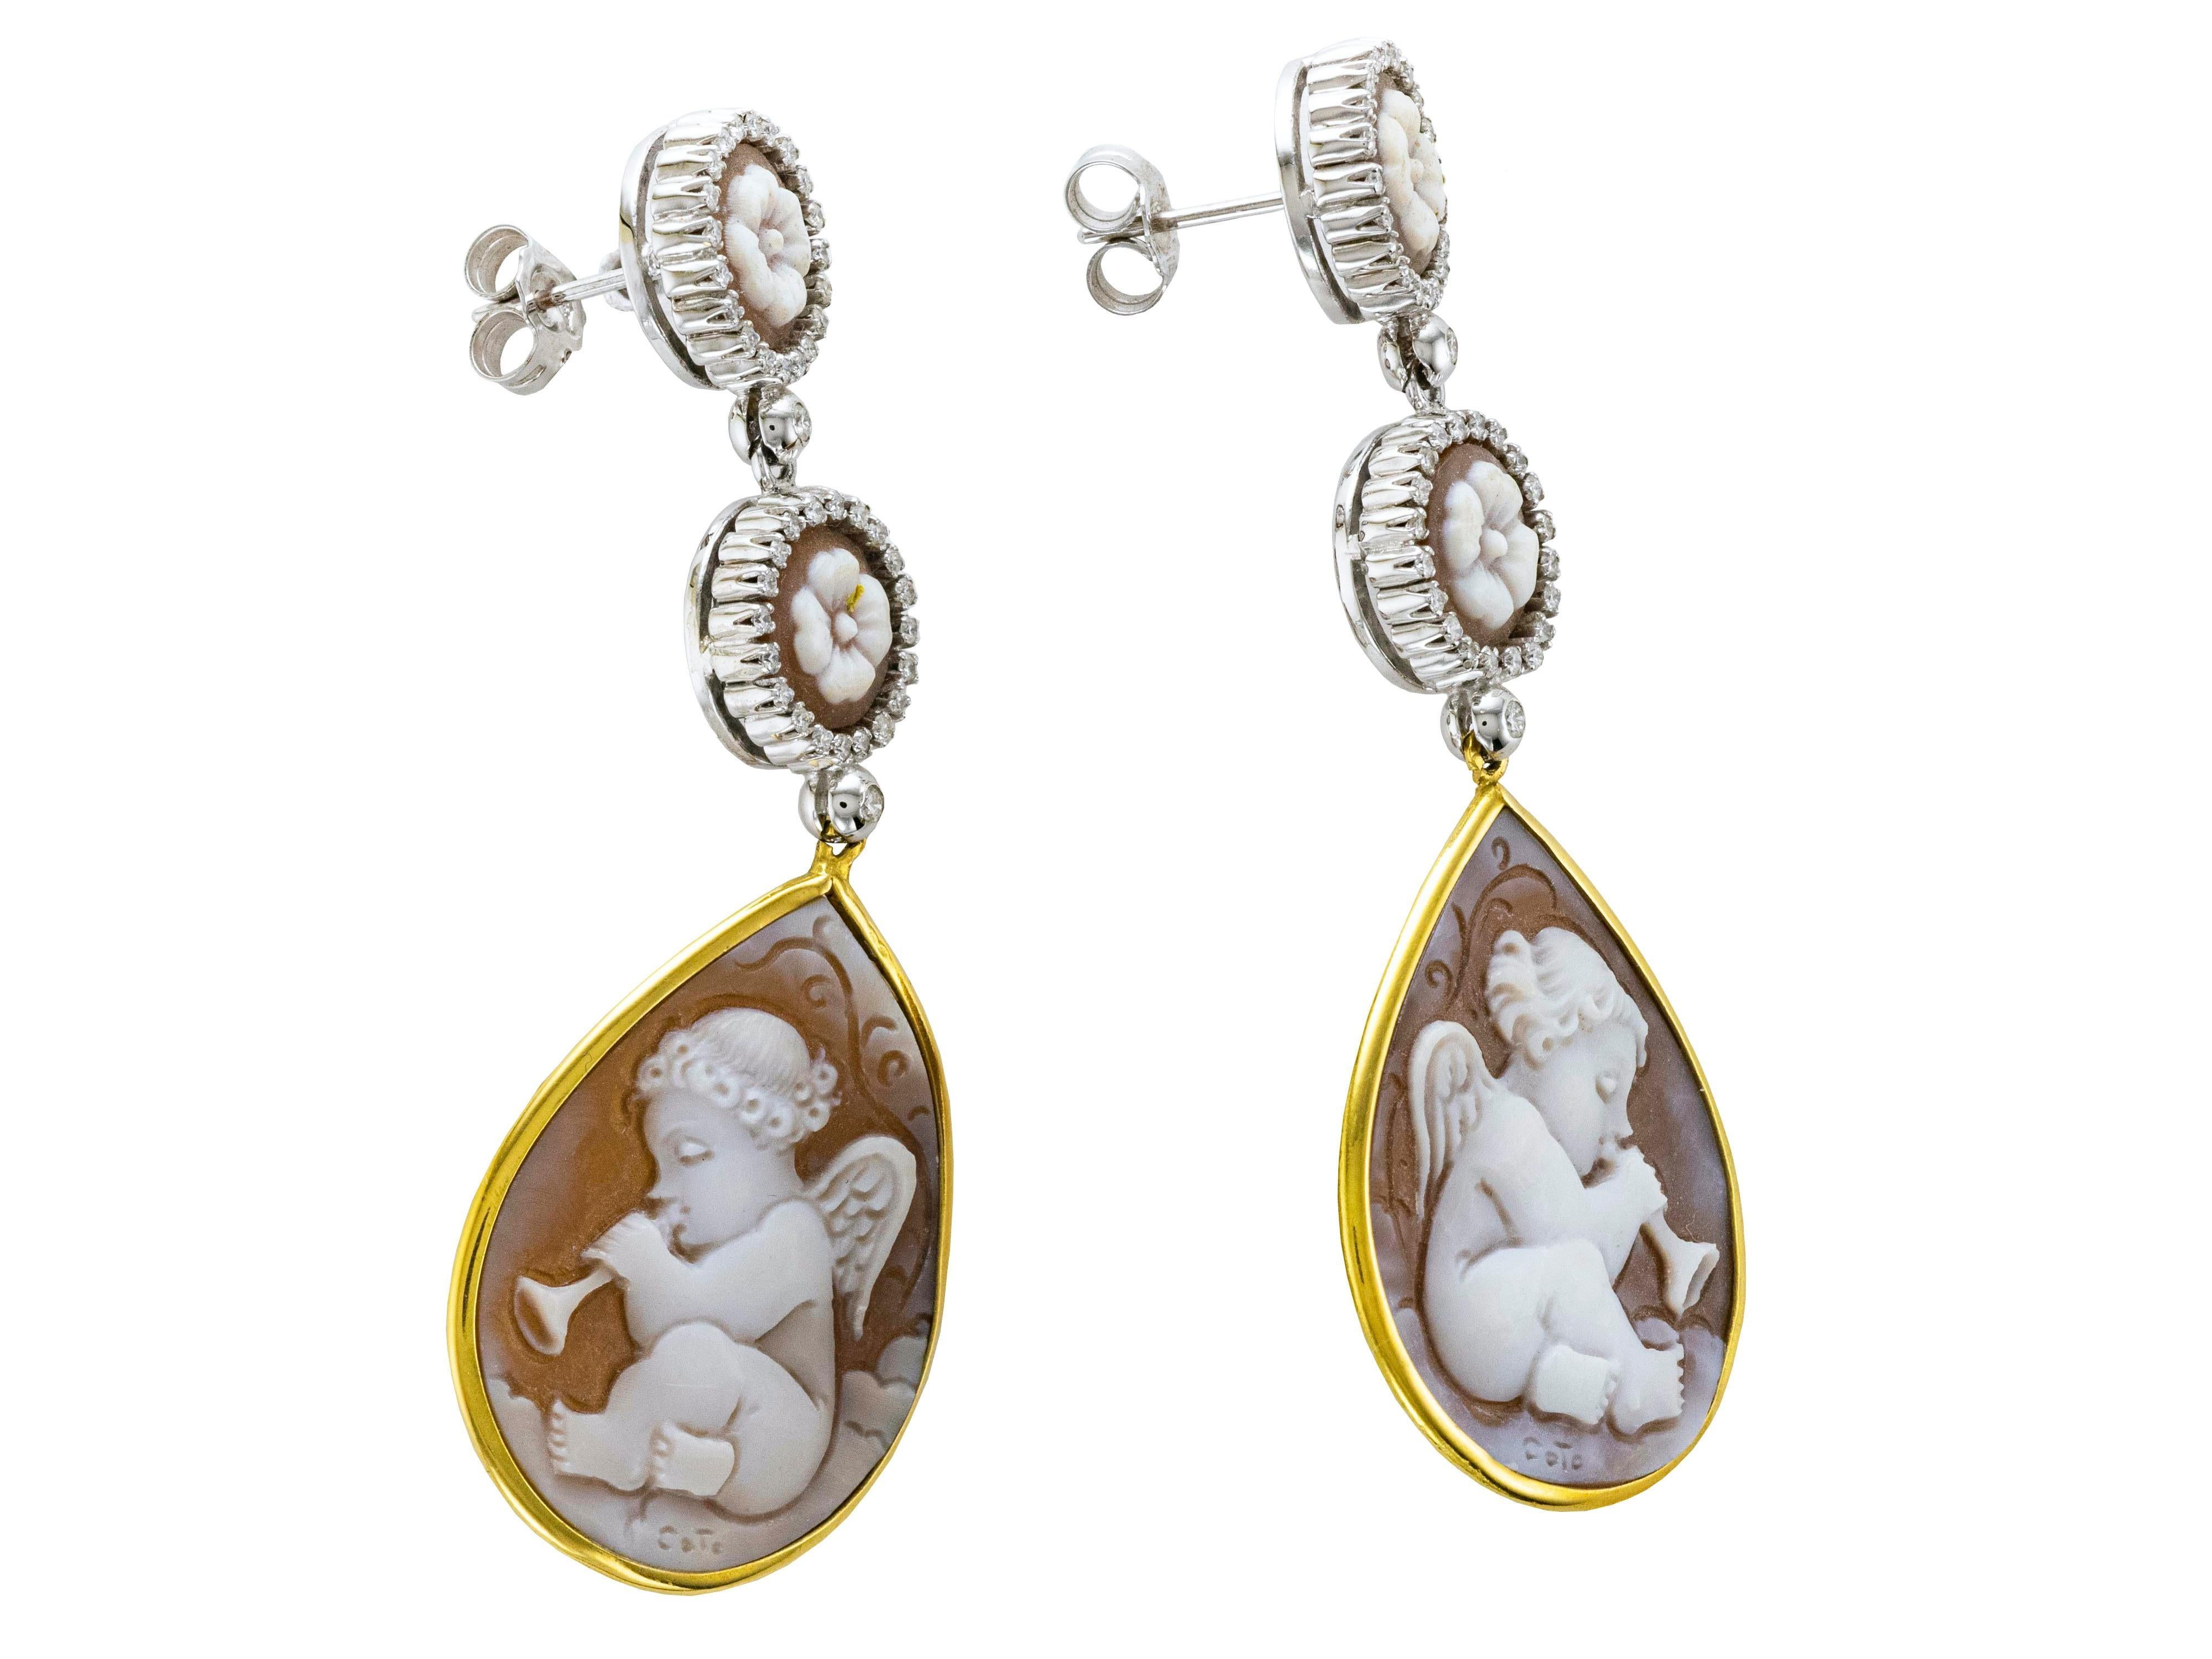 18 Karat yellow and white gold articulated drop earrings.
Carved by hand cameo representing musician angels and flowers on the top side.
You can see the artist's signature on every Cameo drop.
Embellished with 40 Diamonds and two bigger Diamonds on